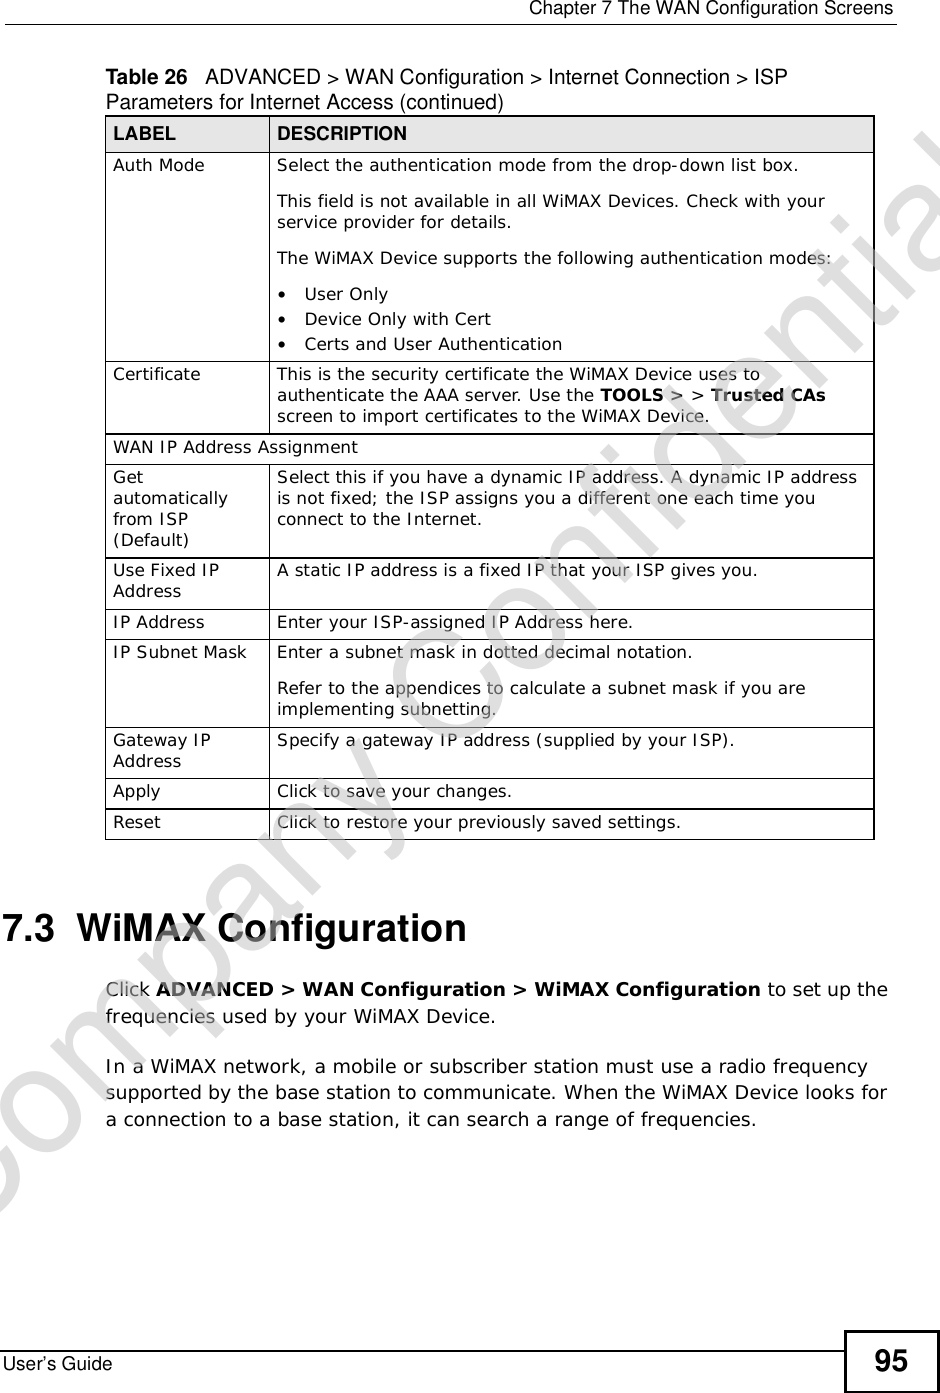  Chapter 7The WAN Configuration ScreensUser’s Guide 957.3  WiMAX ConfigurationClick ADVANCED &gt; WAN Configuration &gt; WiMAX Configuration to set up the frequencies used by your WiMAX Device.In a WiMAX network, a mobile or subscriber station must use a radio frequency supported by the base station to communicate. When the WiMAX Device looks for a connection to a base station, it can search a range of frequencies.Auth ModeSelect the authentication mode from the drop-down list box.This field is not available in all WiMAX Devices. Check with your service provider for details.The WiMAX Device supports the following authentication modes:•User Only•Device Only with Cert•Certs and User AuthenticationCertificateThis is the security certificate the WiMAX Device uses to authenticate the AAA server. Use the TOOLS &gt; &gt; Trusted CAsscreen to import certificates to the WiMAX Device.WAN IP Address AssignmentGetautomatically from ISP (Default)Select this if you have a dynamic IP address. A dynamic IP address is not fixed; the ISP assigns you a different one each time you connect to the Internet. Use Fixed IP Address A static IP address is a fixed IP that your ISP gives you.IP AddressEnter your ISP-assigned IP Address here.IP Subnet MaskEnter a subnet mask in dotted decimal notation. Refer to the appendicesto calculate a subnet mask if you are implementing subnetting.Gateway IP Address Specify a gateway IP address (supplied by your ISP).ApplyClick to save your changes.ResetClick to restore your previously saved settings.Table 26   ADVANCED &gt; WAN Configuration &gt; Internet Connection &gt; ISP Parameters for Internet Access (continued)LABEL DESCRIPTIONCompany Confidential